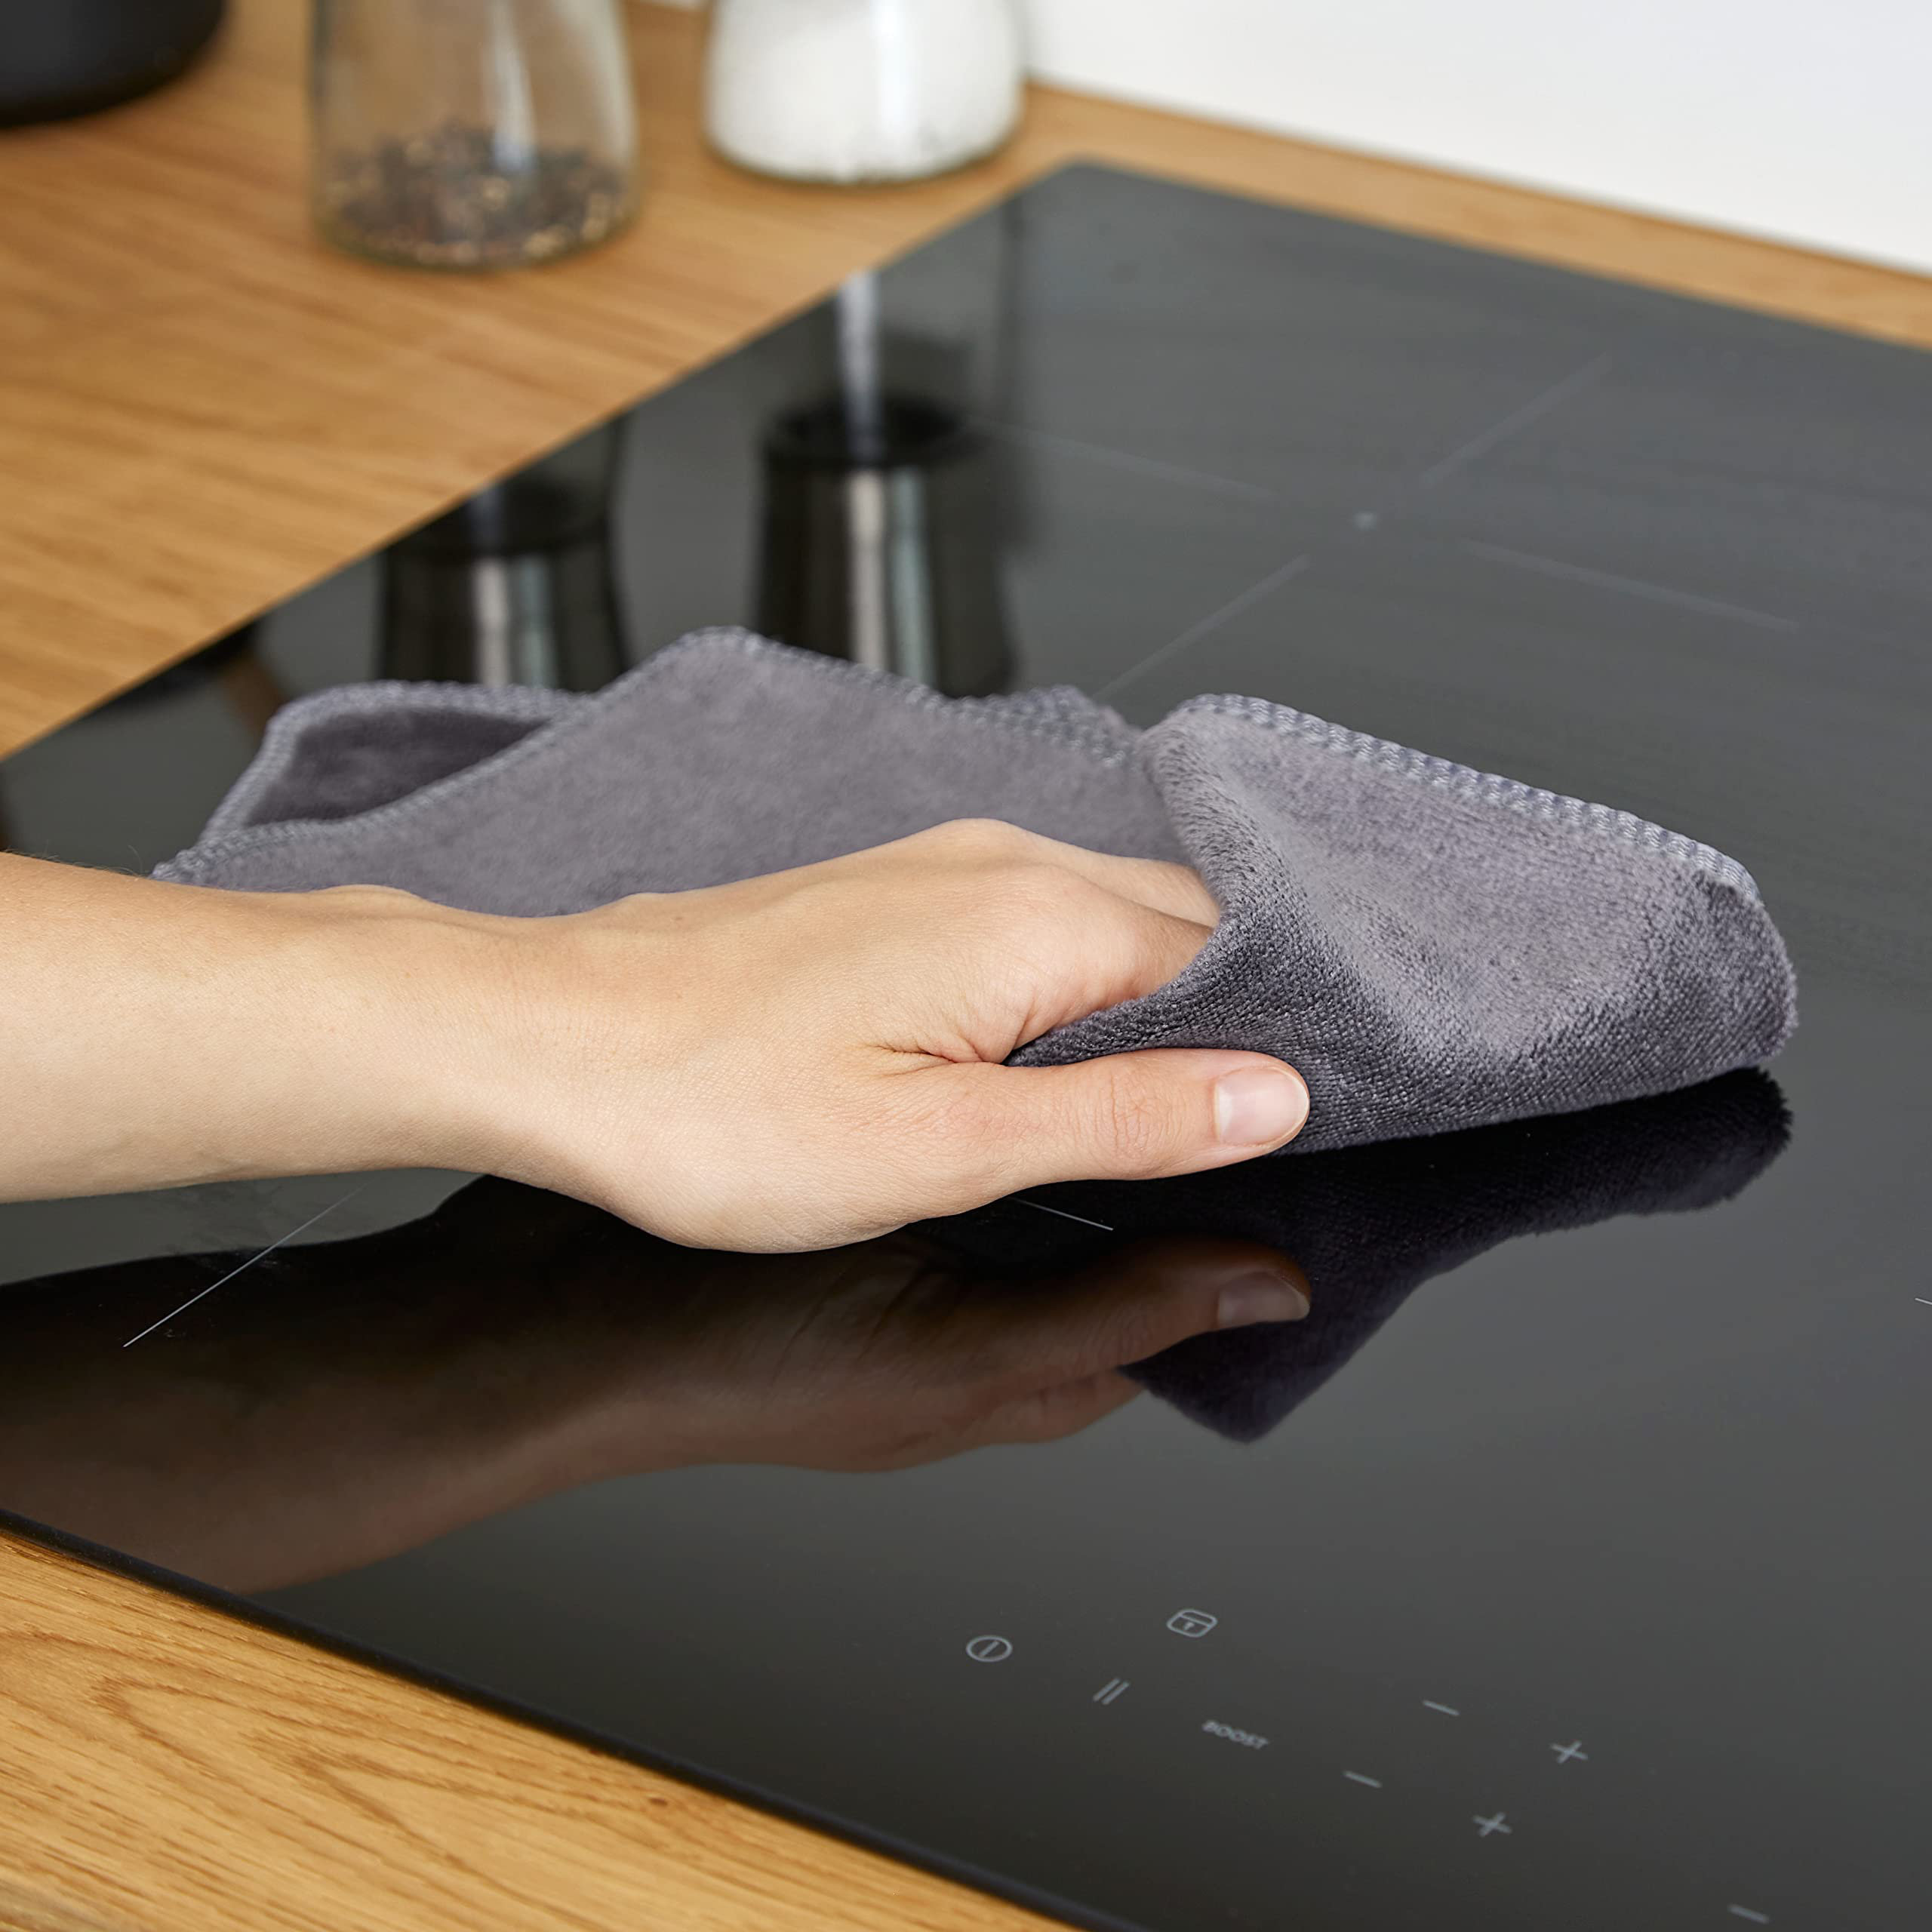 BeGreat Cleaning Cloth